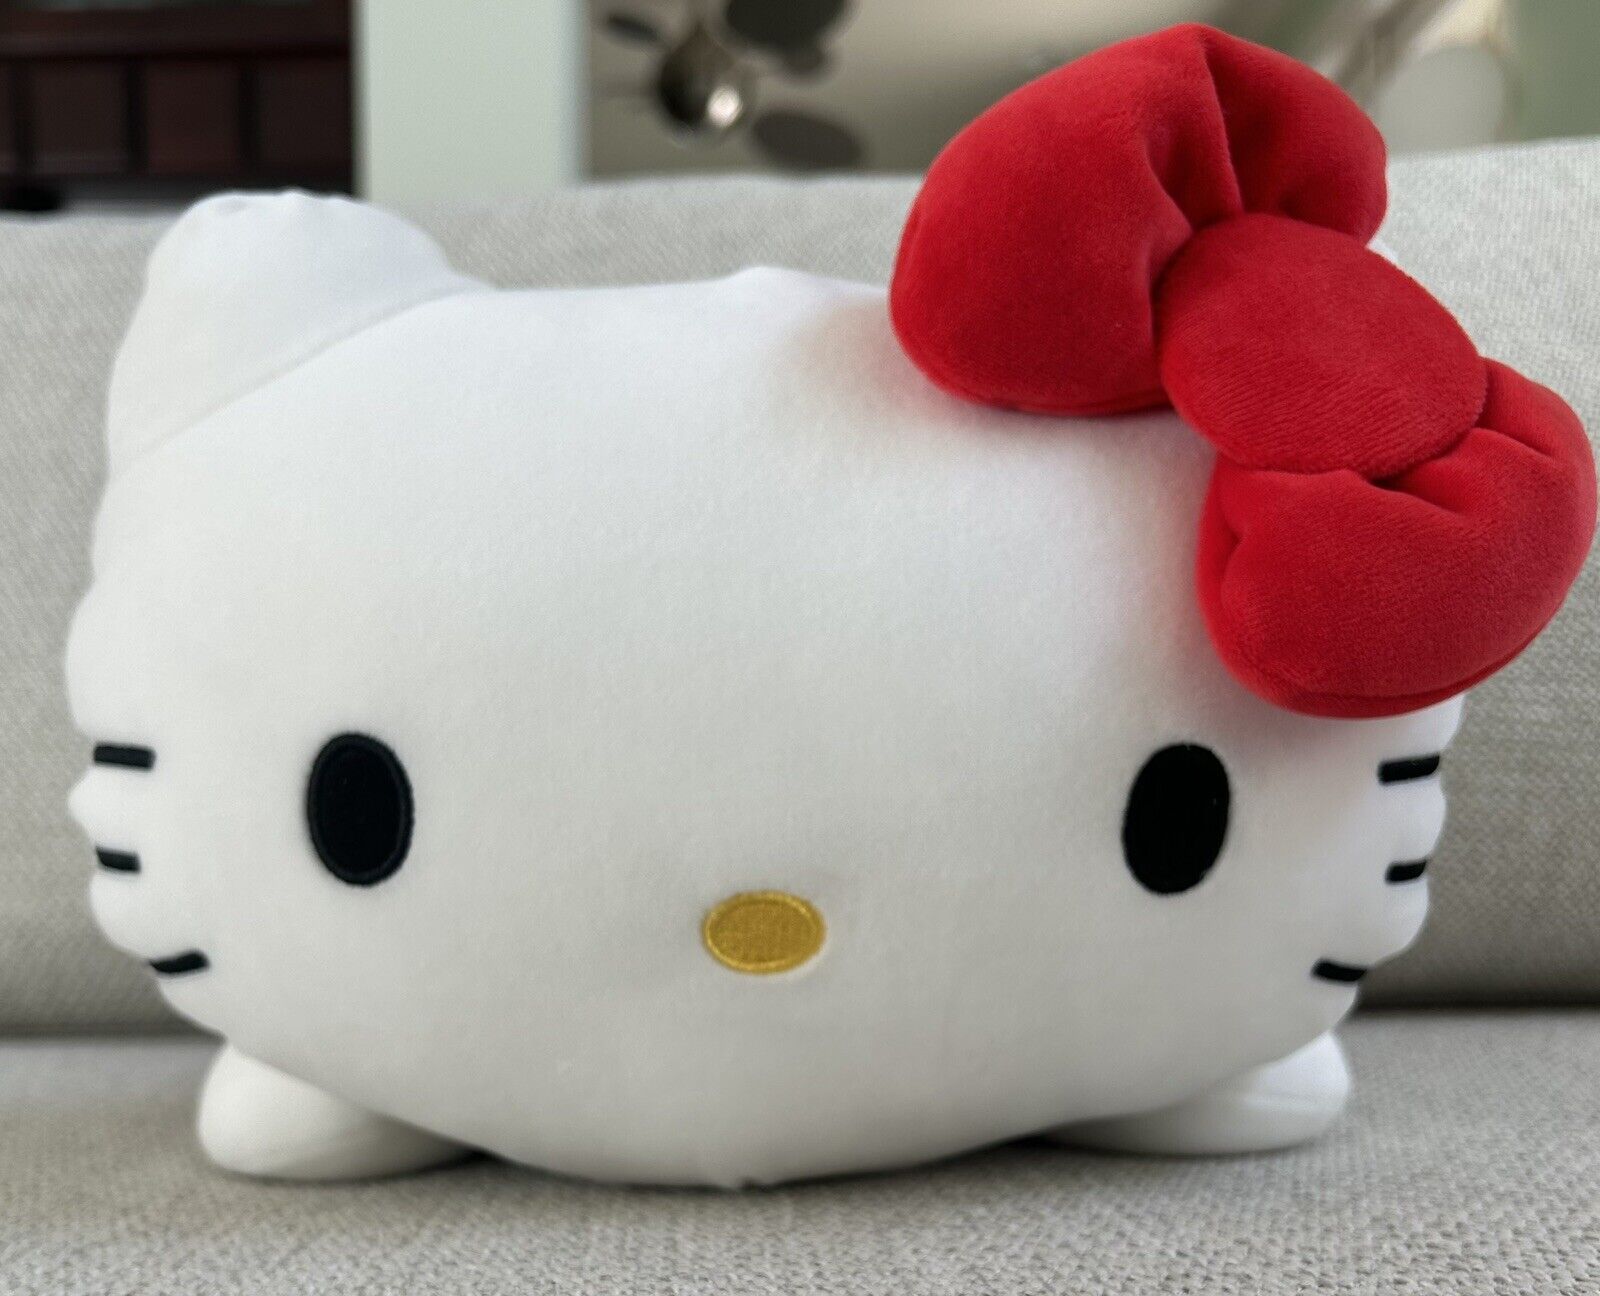 Special Rare Large Sanrio Hello Kitty 14” Laying Down Soft Plush Stuffed Toy NWT